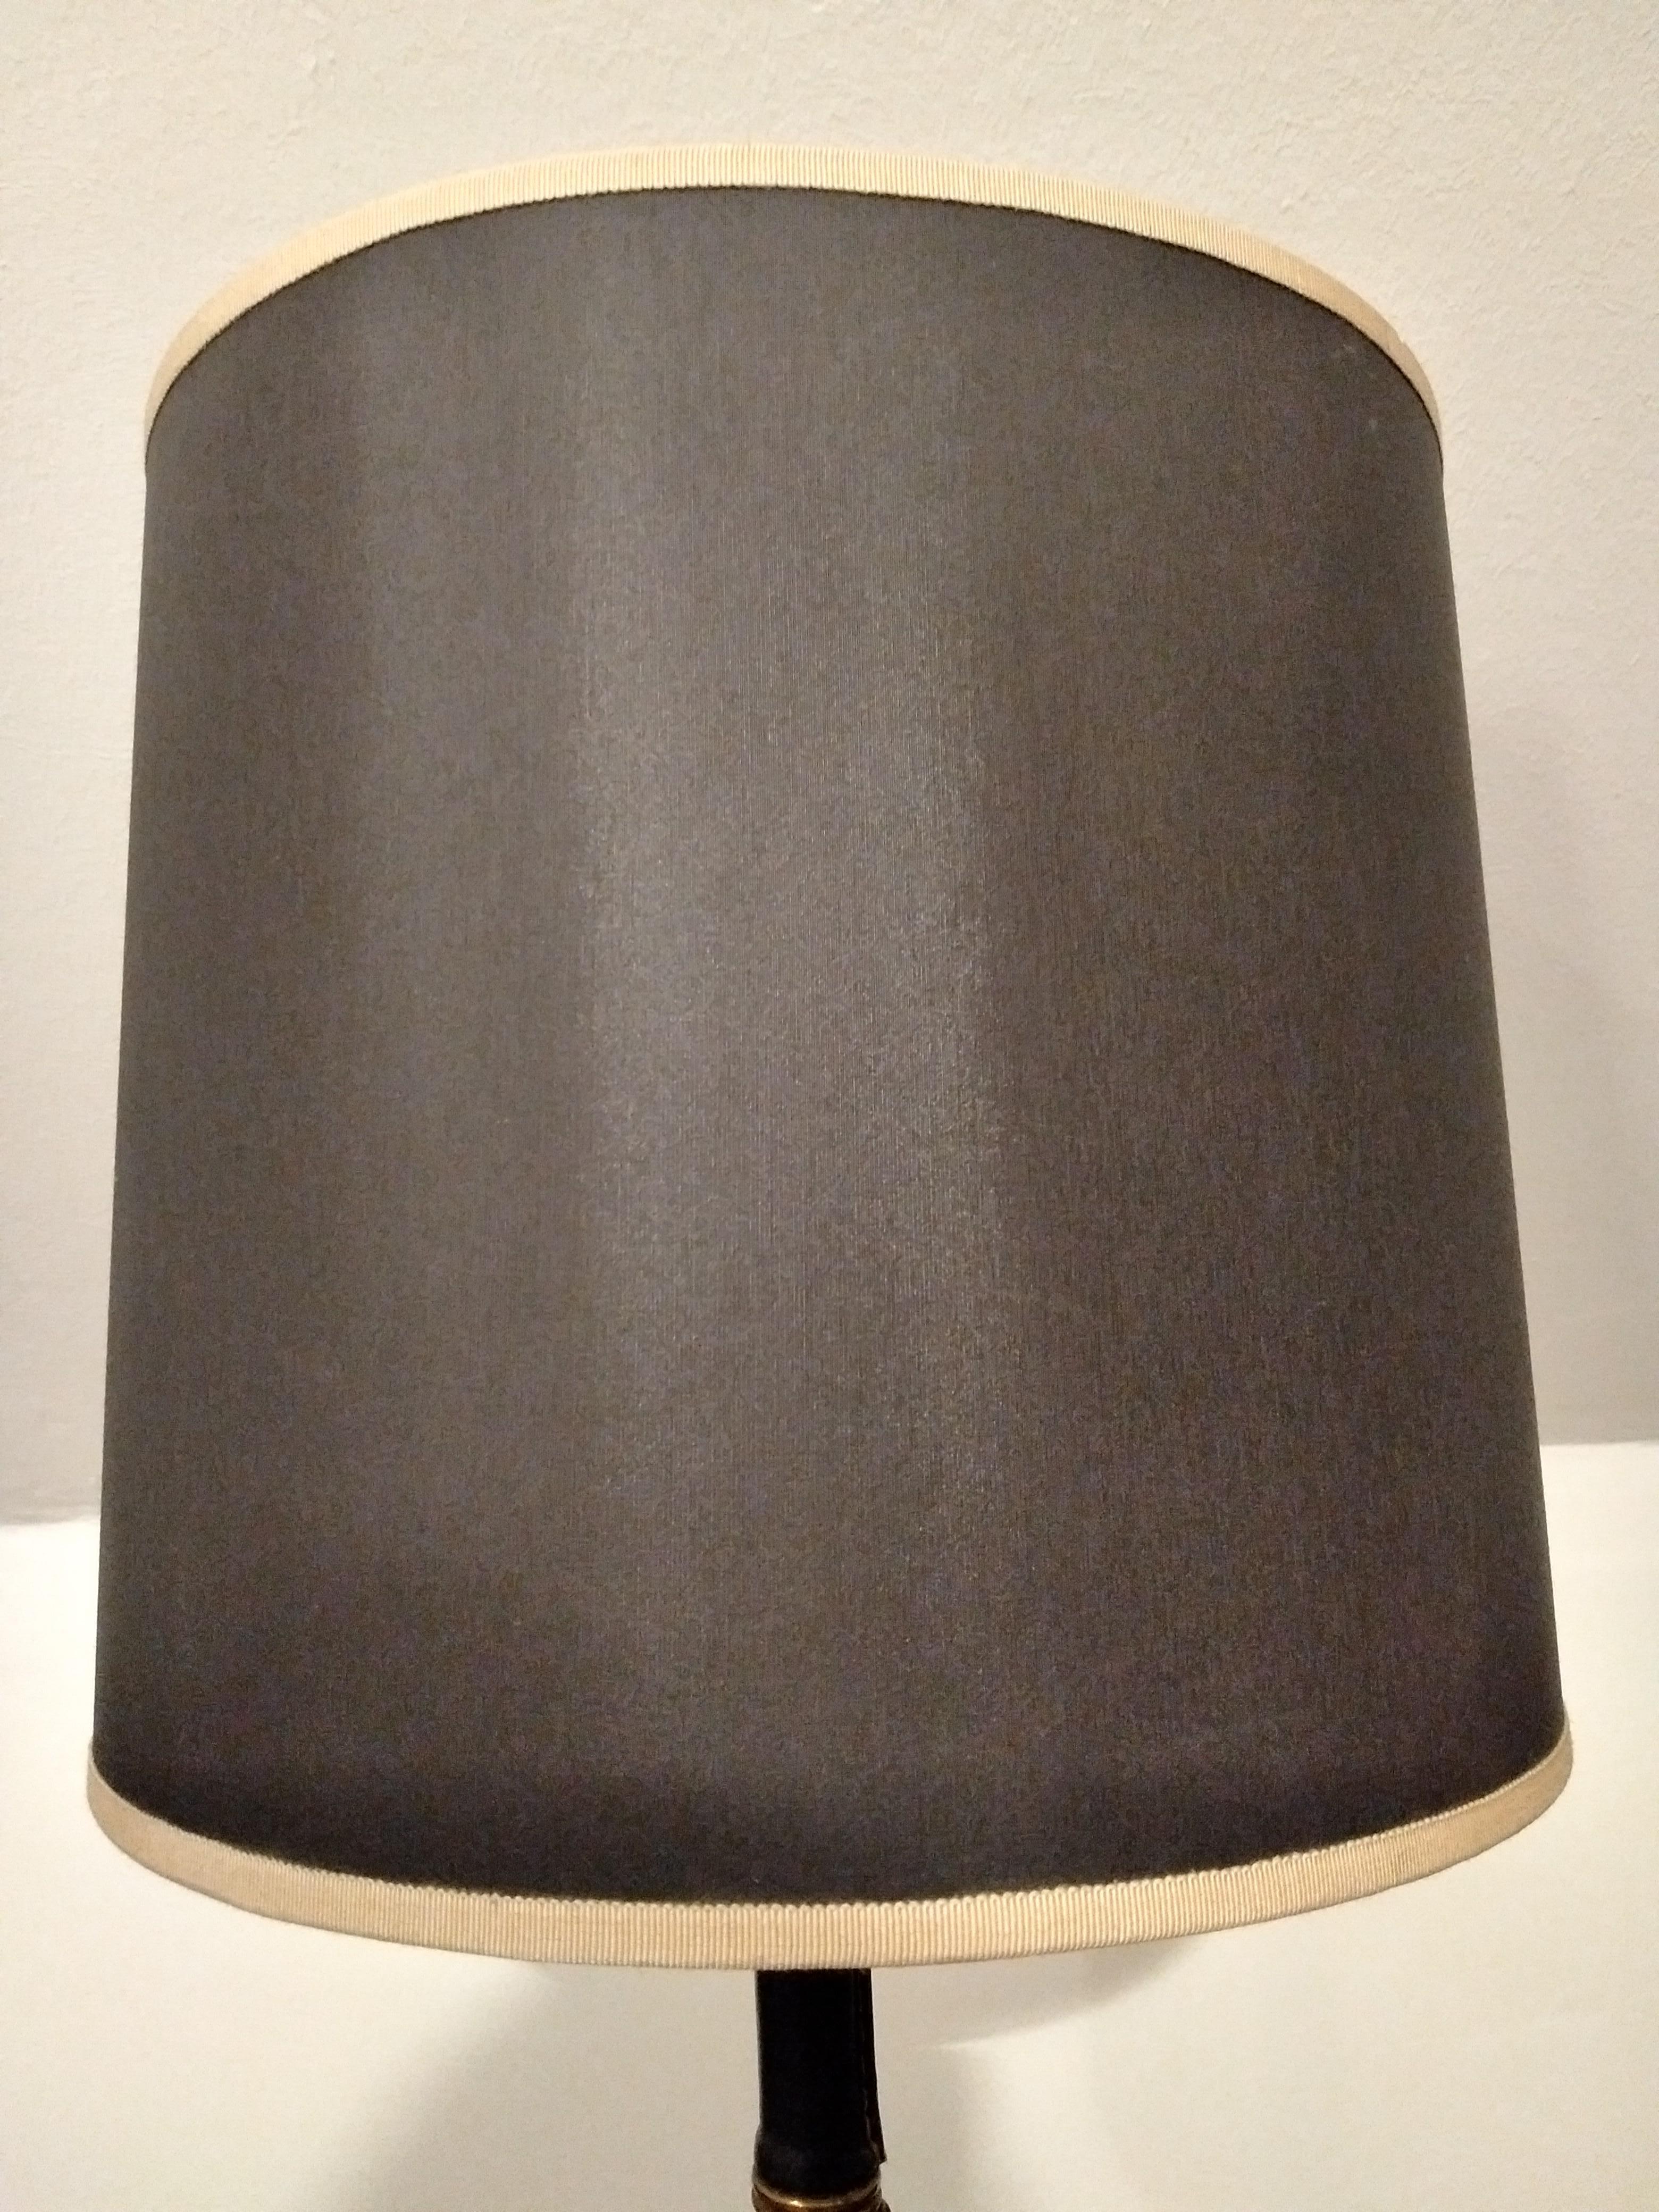 Jacques Adnet Black Stitched Leather Table Lamp, Bamboo Form, French, 1950s For Sale 9